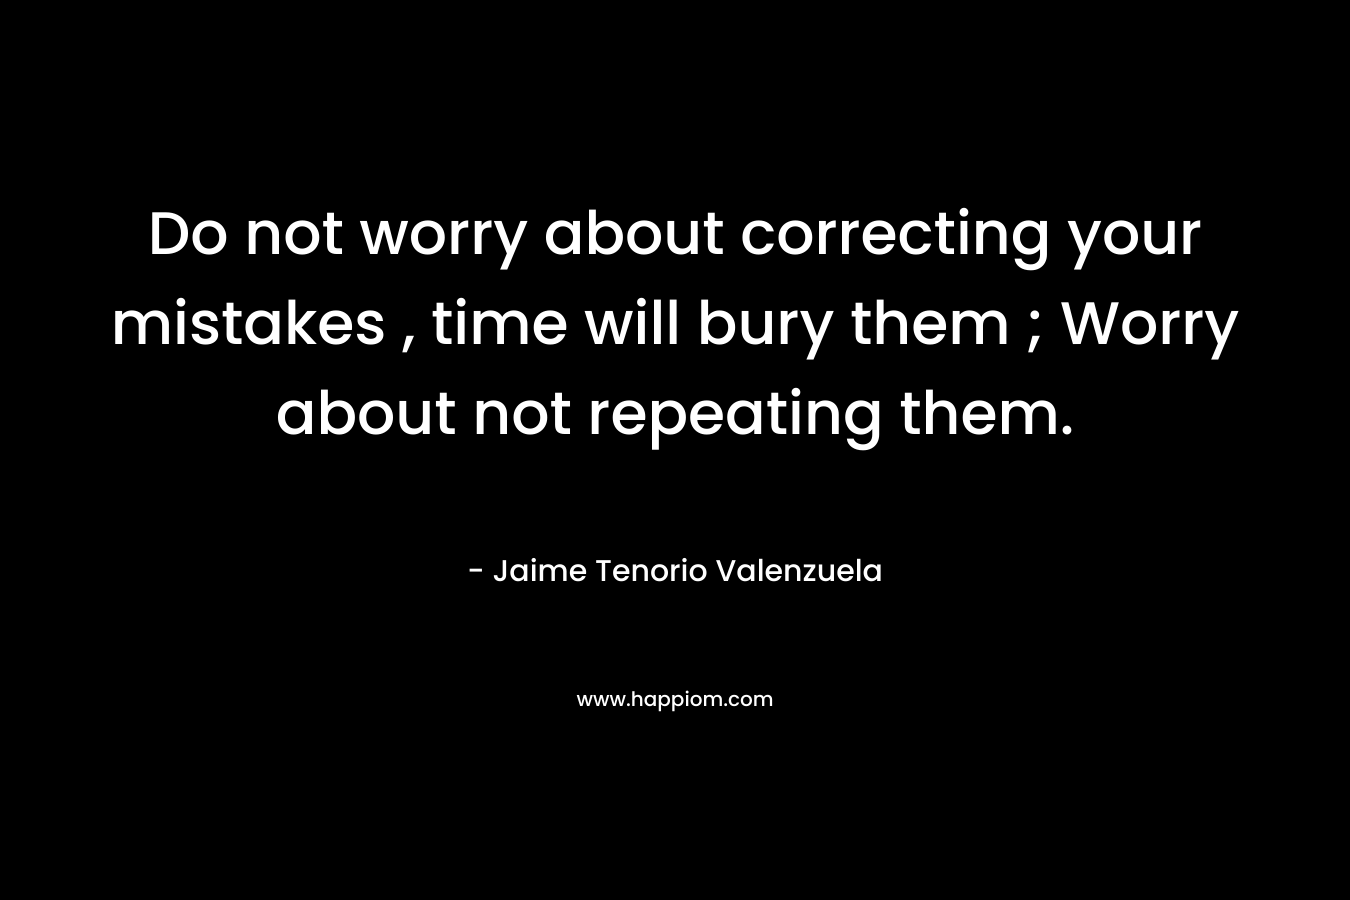 Do not worry about correcting your mistakes , time will bury them ; Worry about not repeating them. – Jaime Tenorio Valenzuela